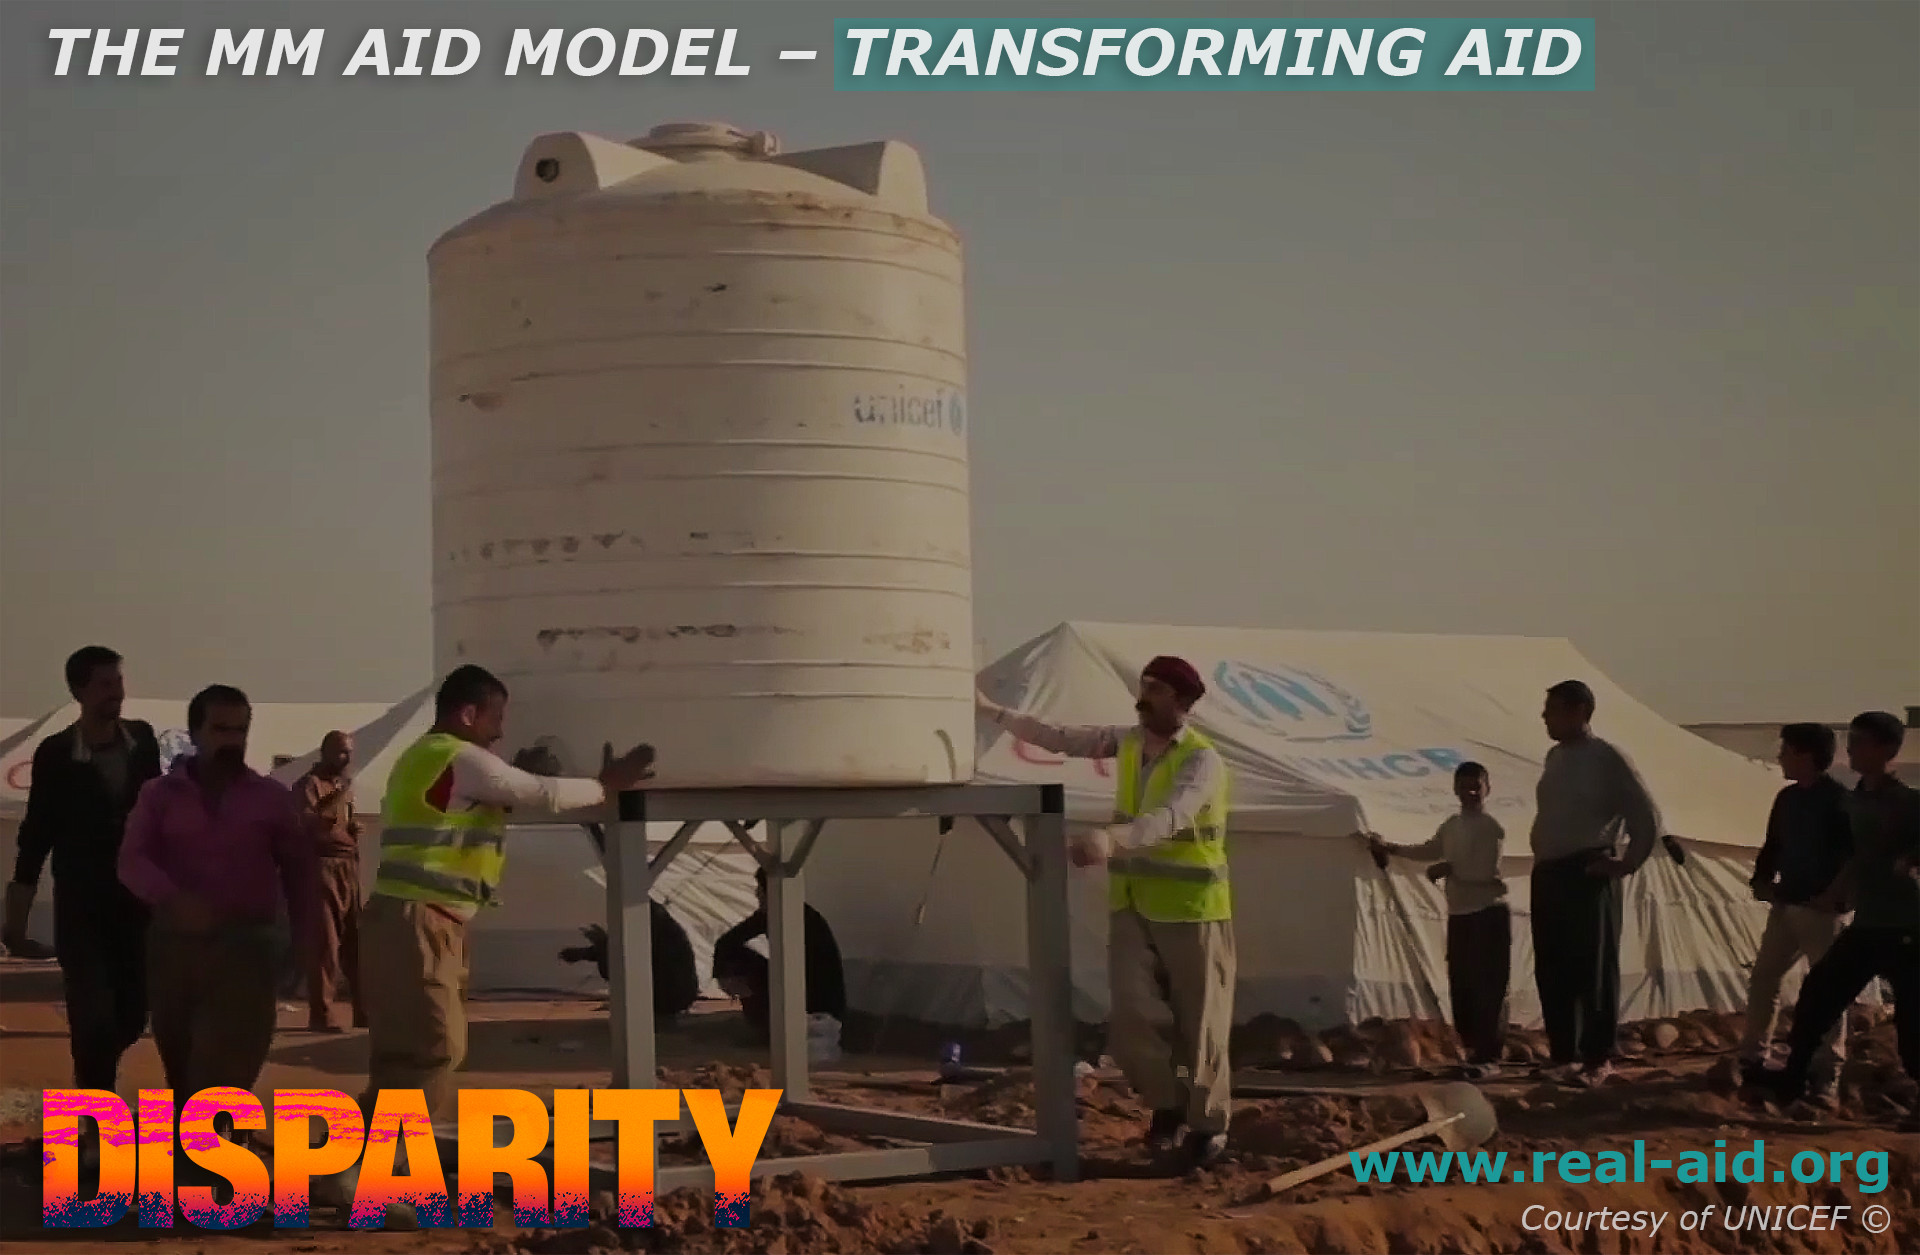 Disparity Film Poster, MM aid model transforming aid text, aid workers assembling tents and water image